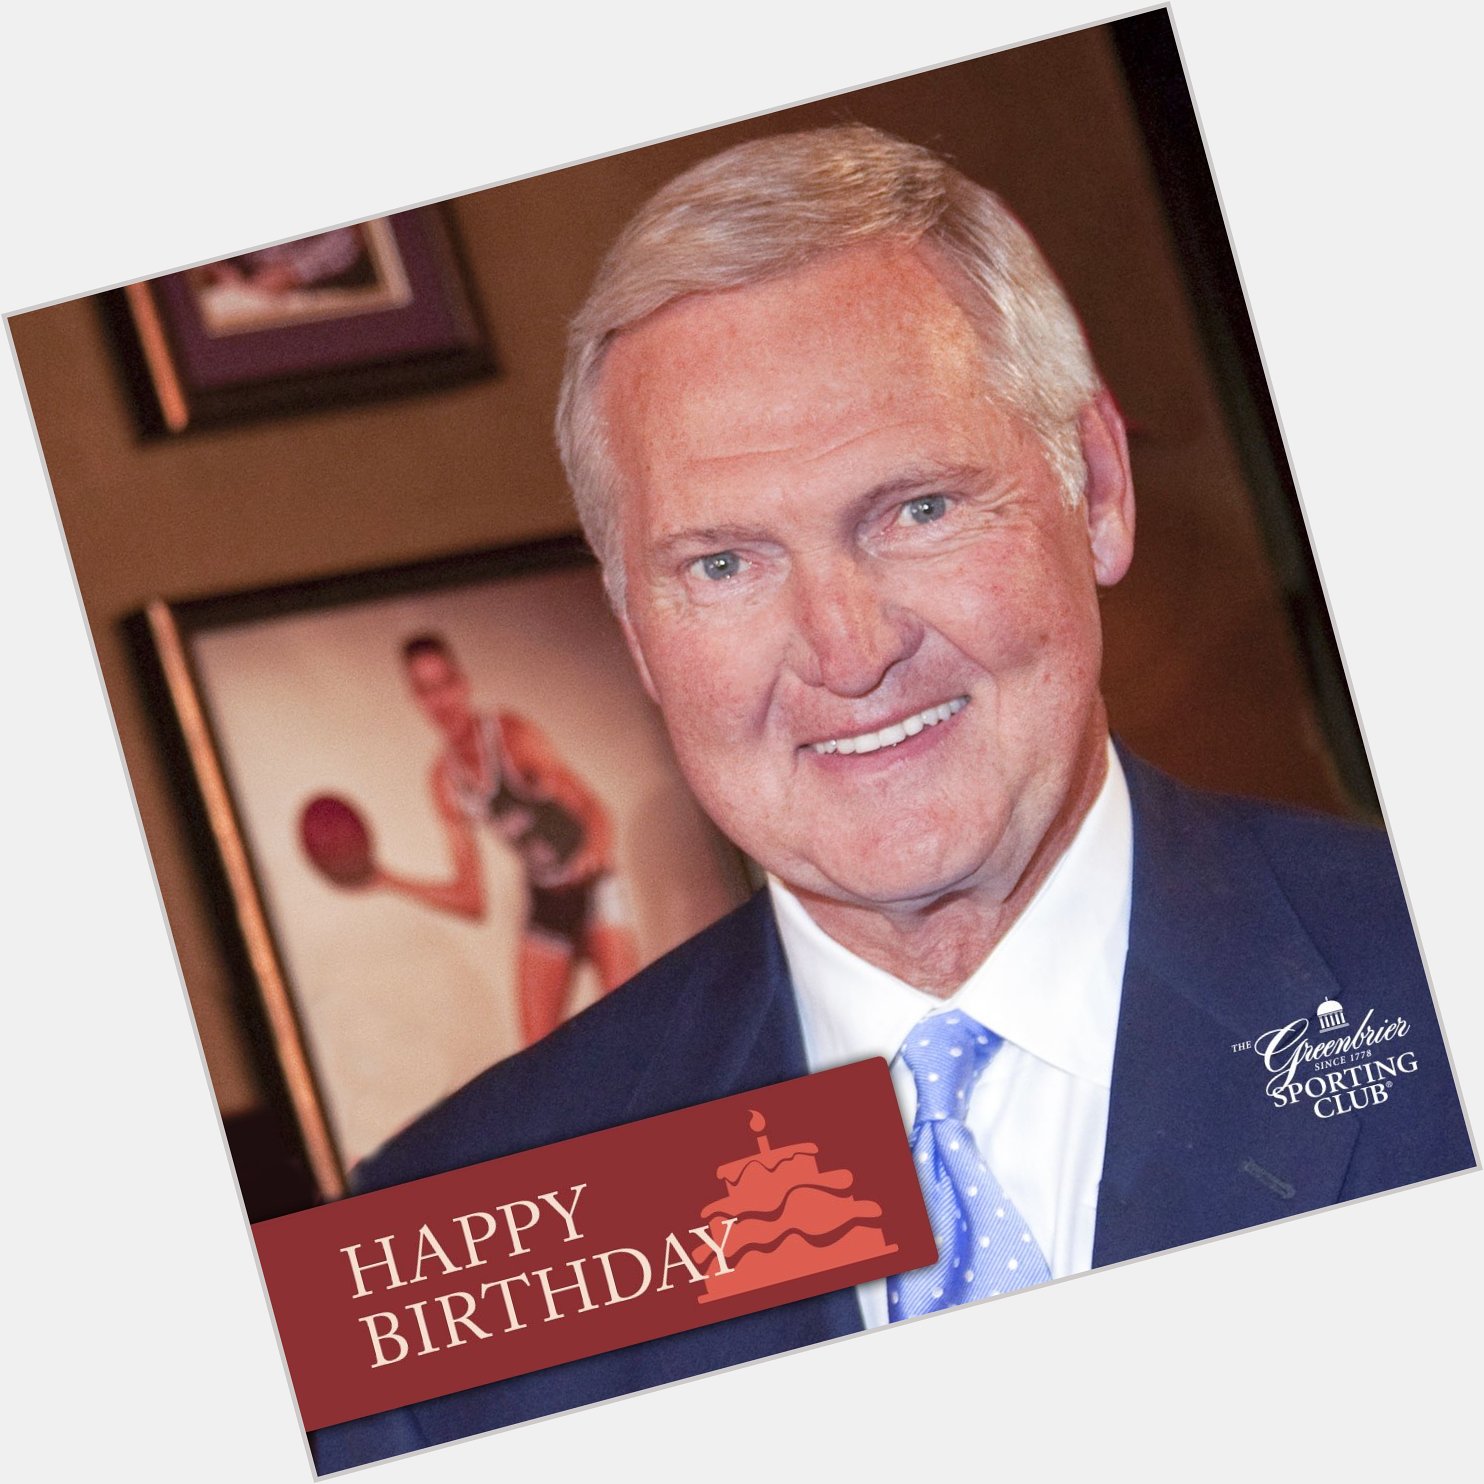 Happy Birthday wishes to the great Jerry West, from your GSC family! 